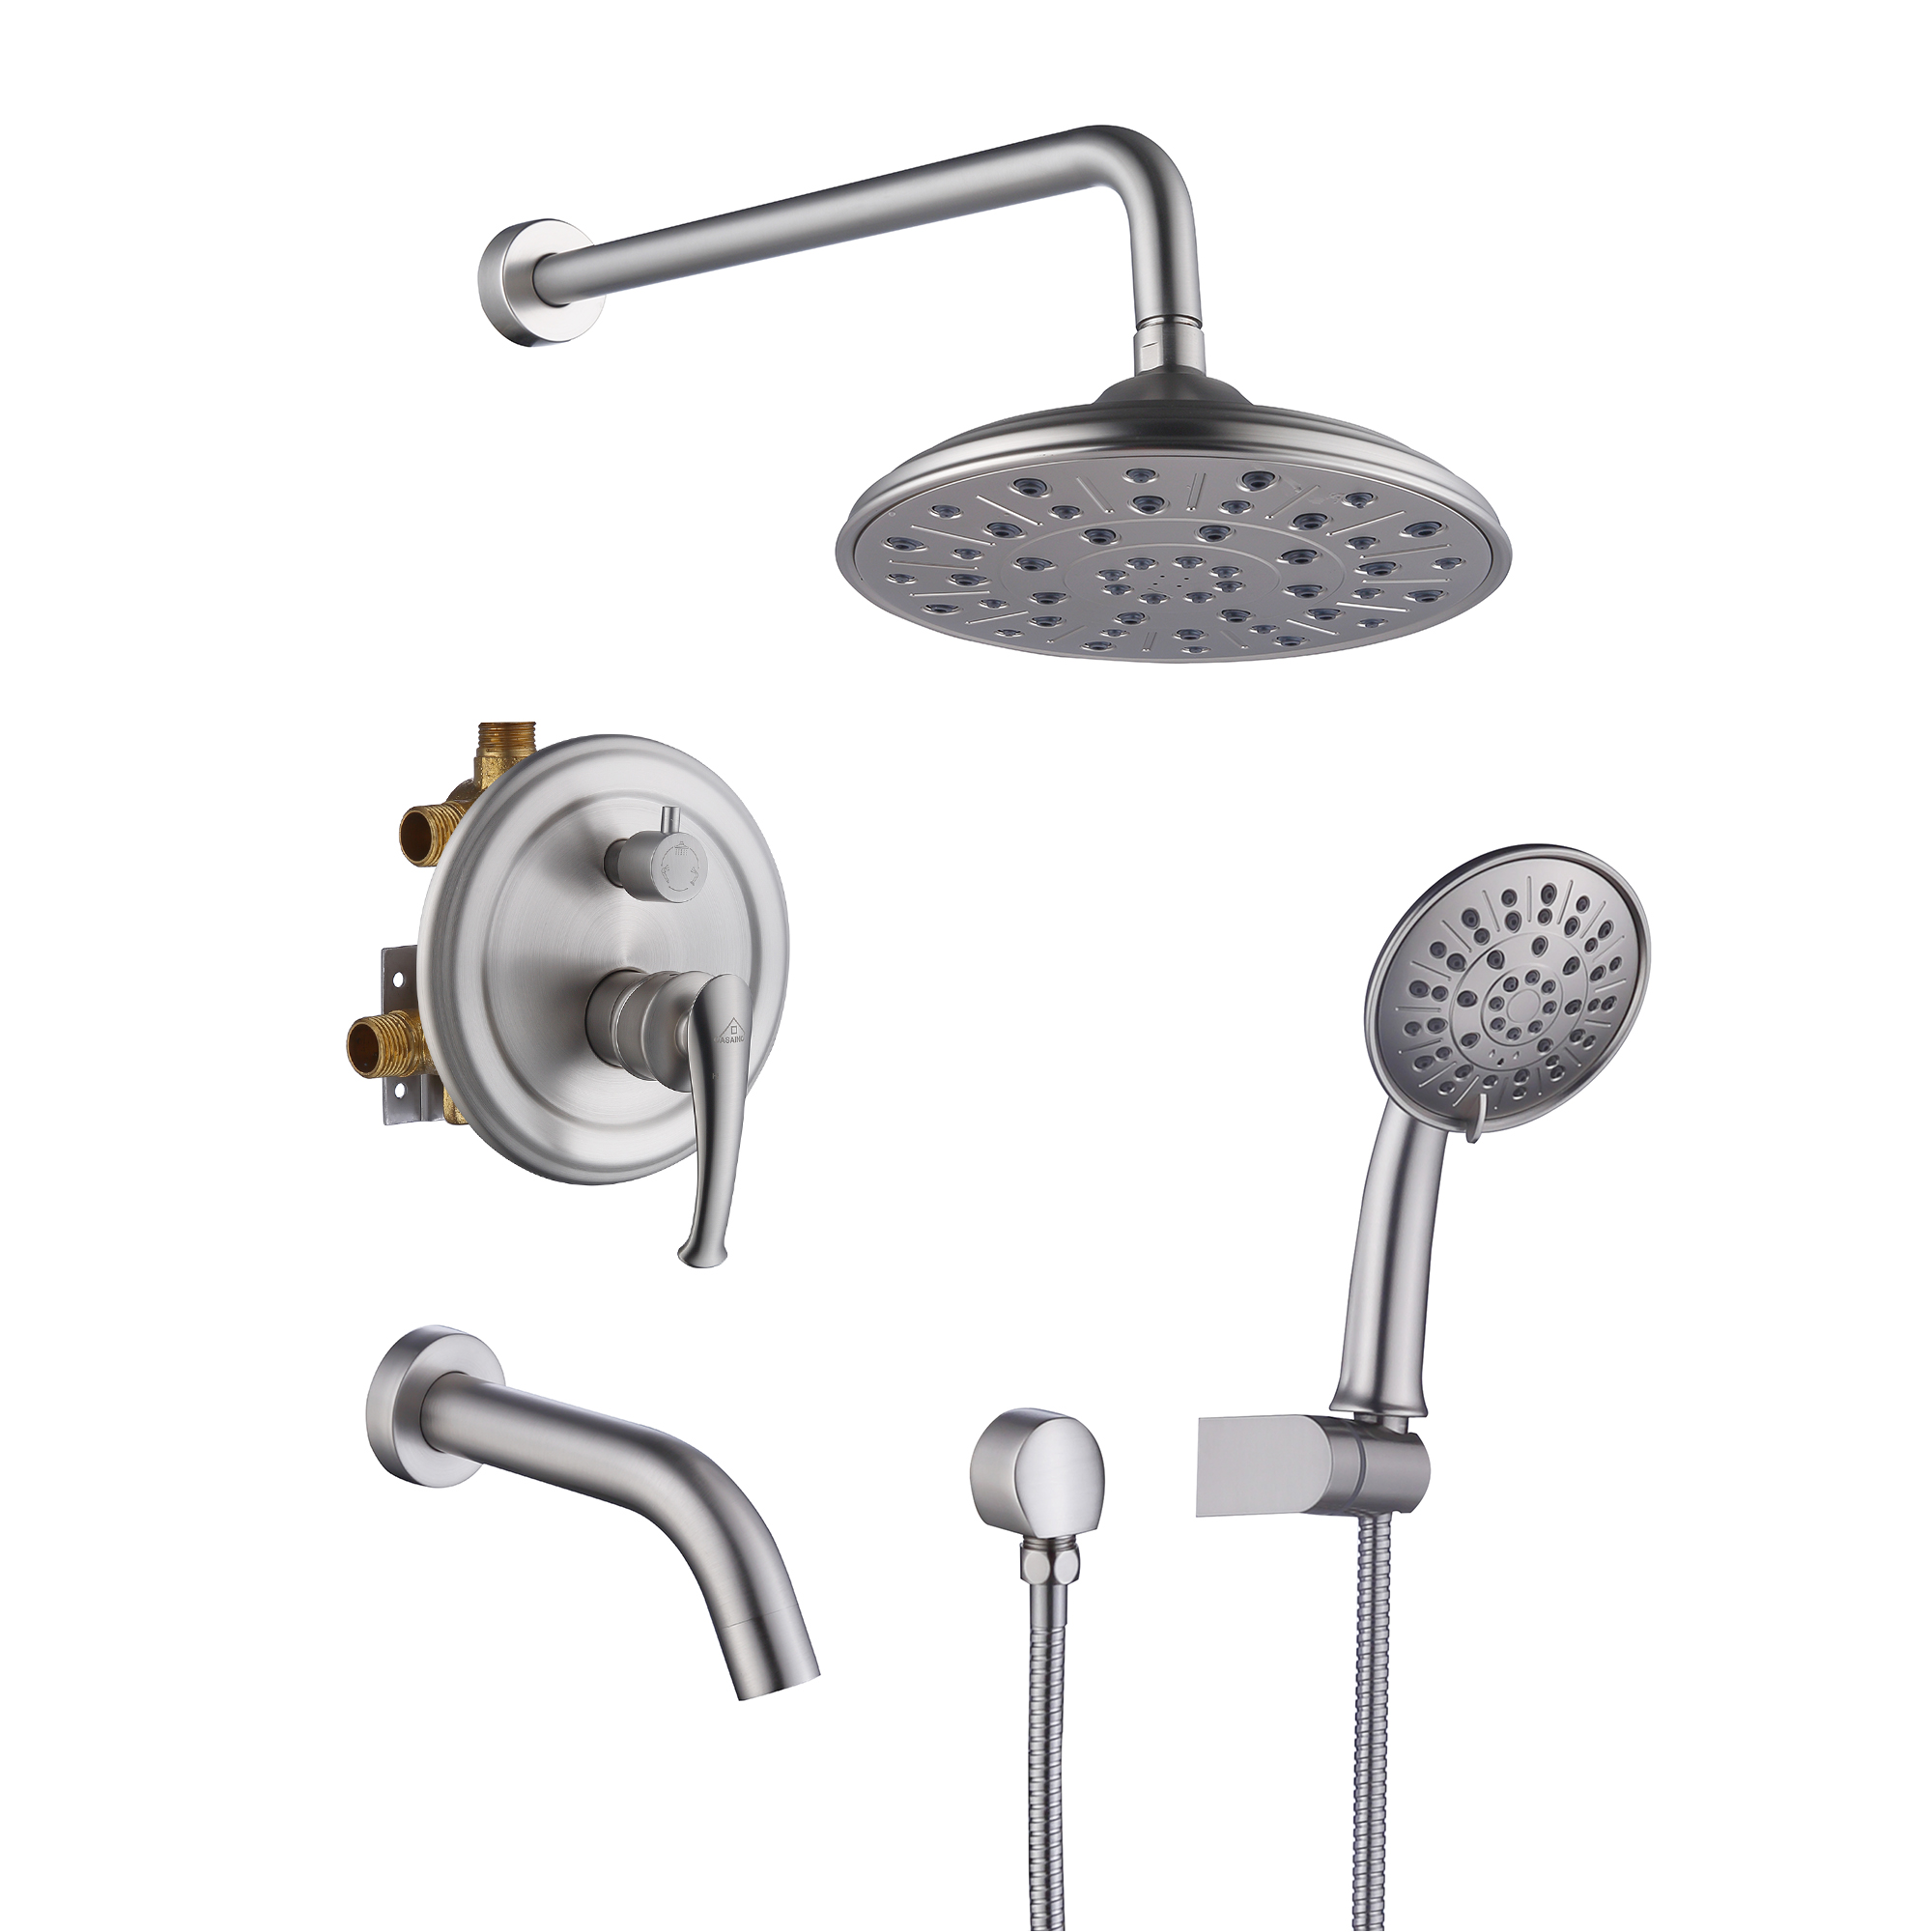 CASAINC 8.3 inch Wall-mounted rain shower faucet with pressure balanced valve